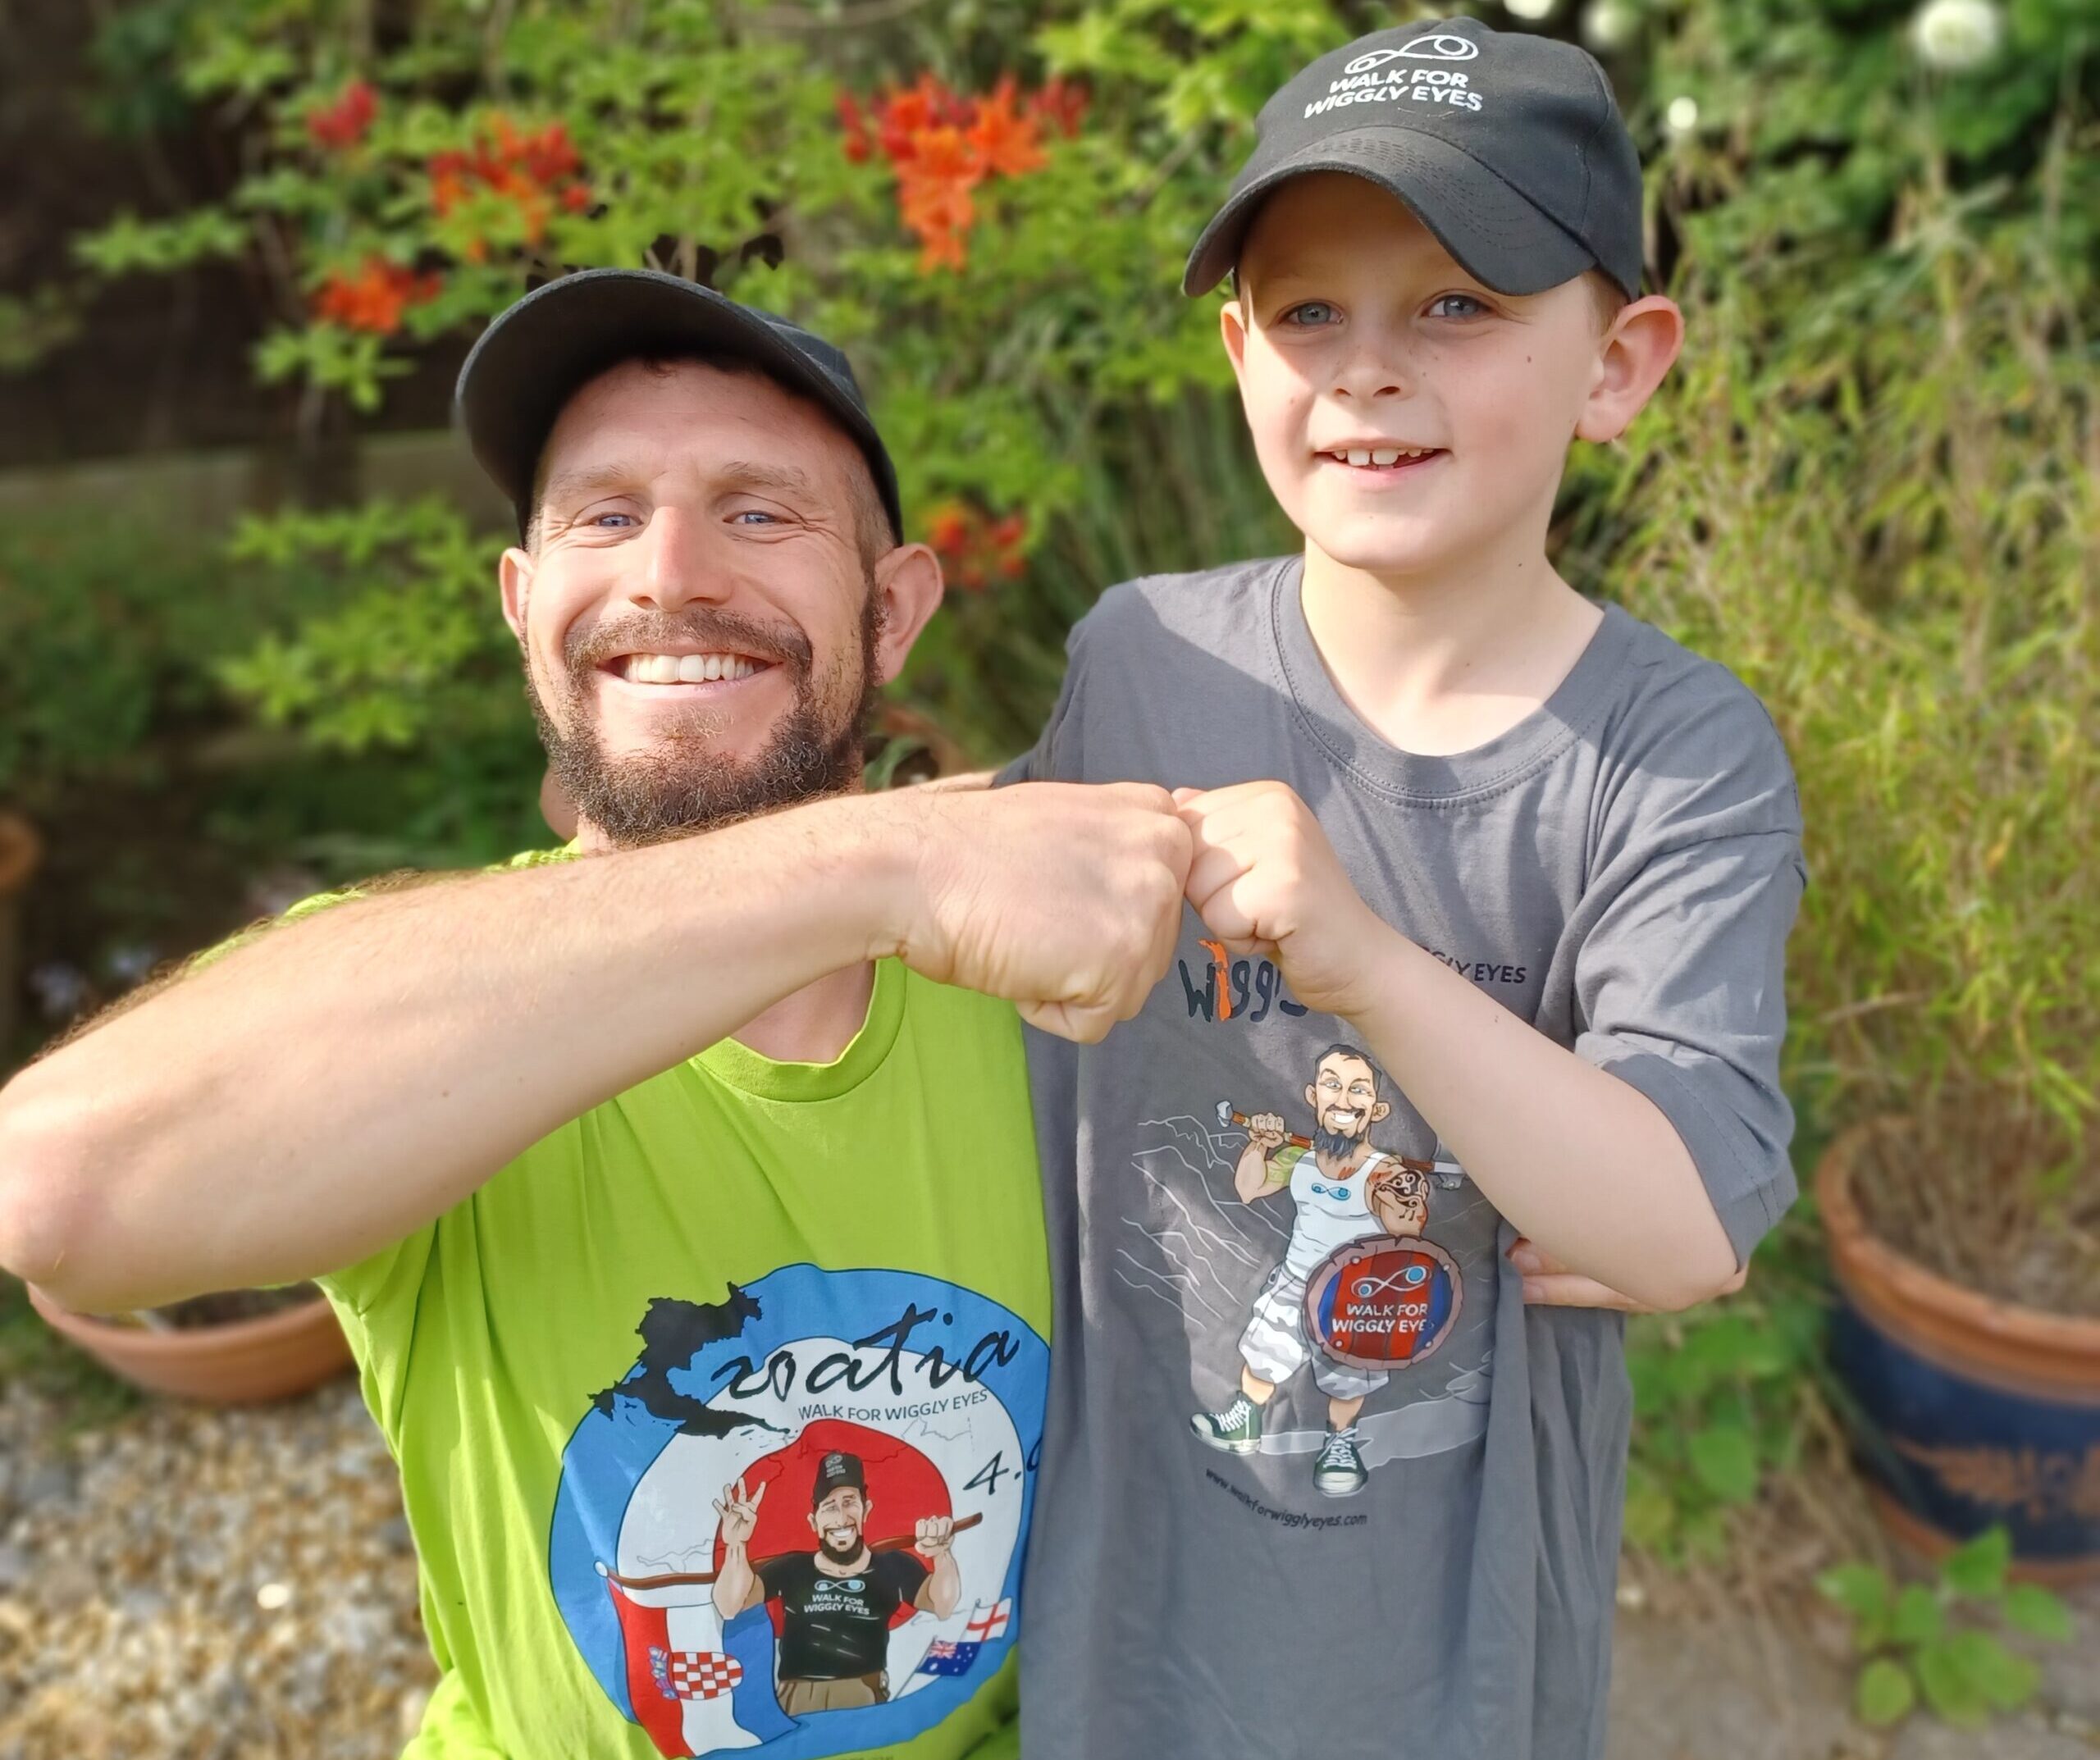 Mike and his nephew, both wearing WWE T-shirts, fist bump for the camera.